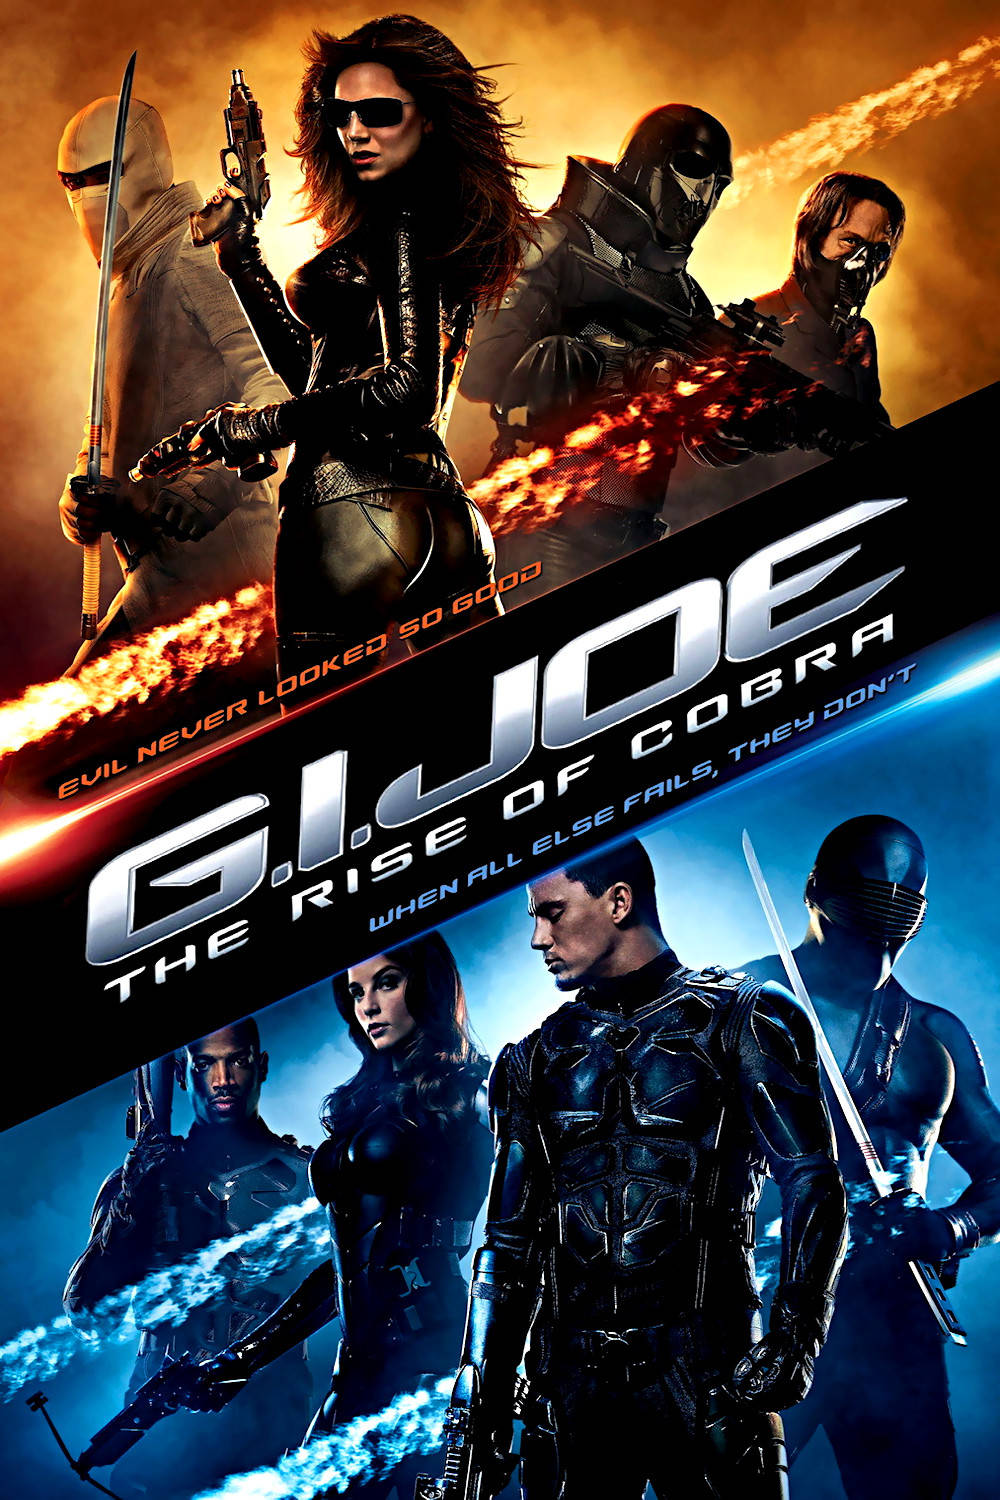 You are currently viewing Notes On A Film – GI Joe: The Rise Of Cobra